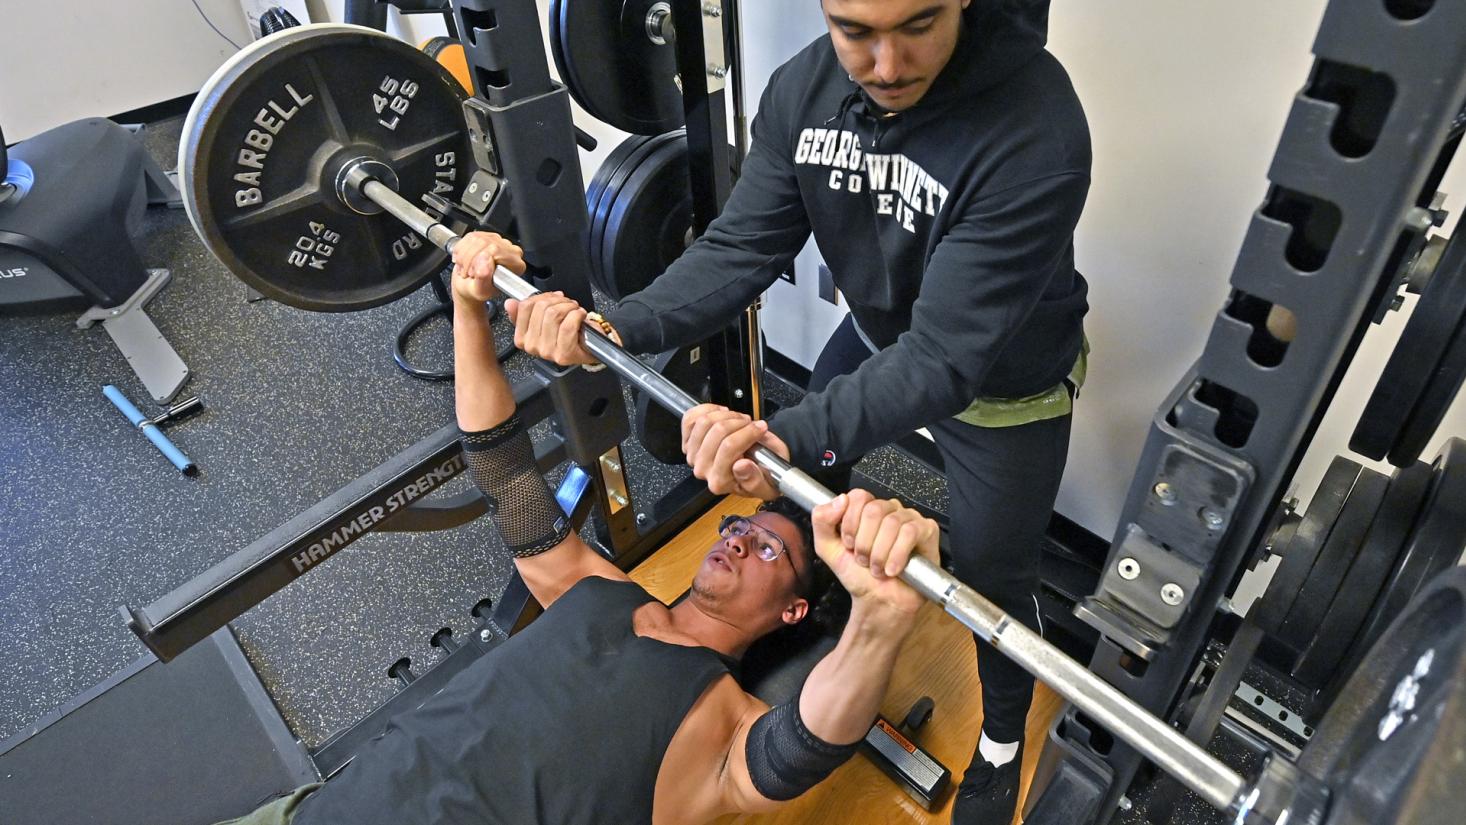 Male student helping other male student lift a barbell